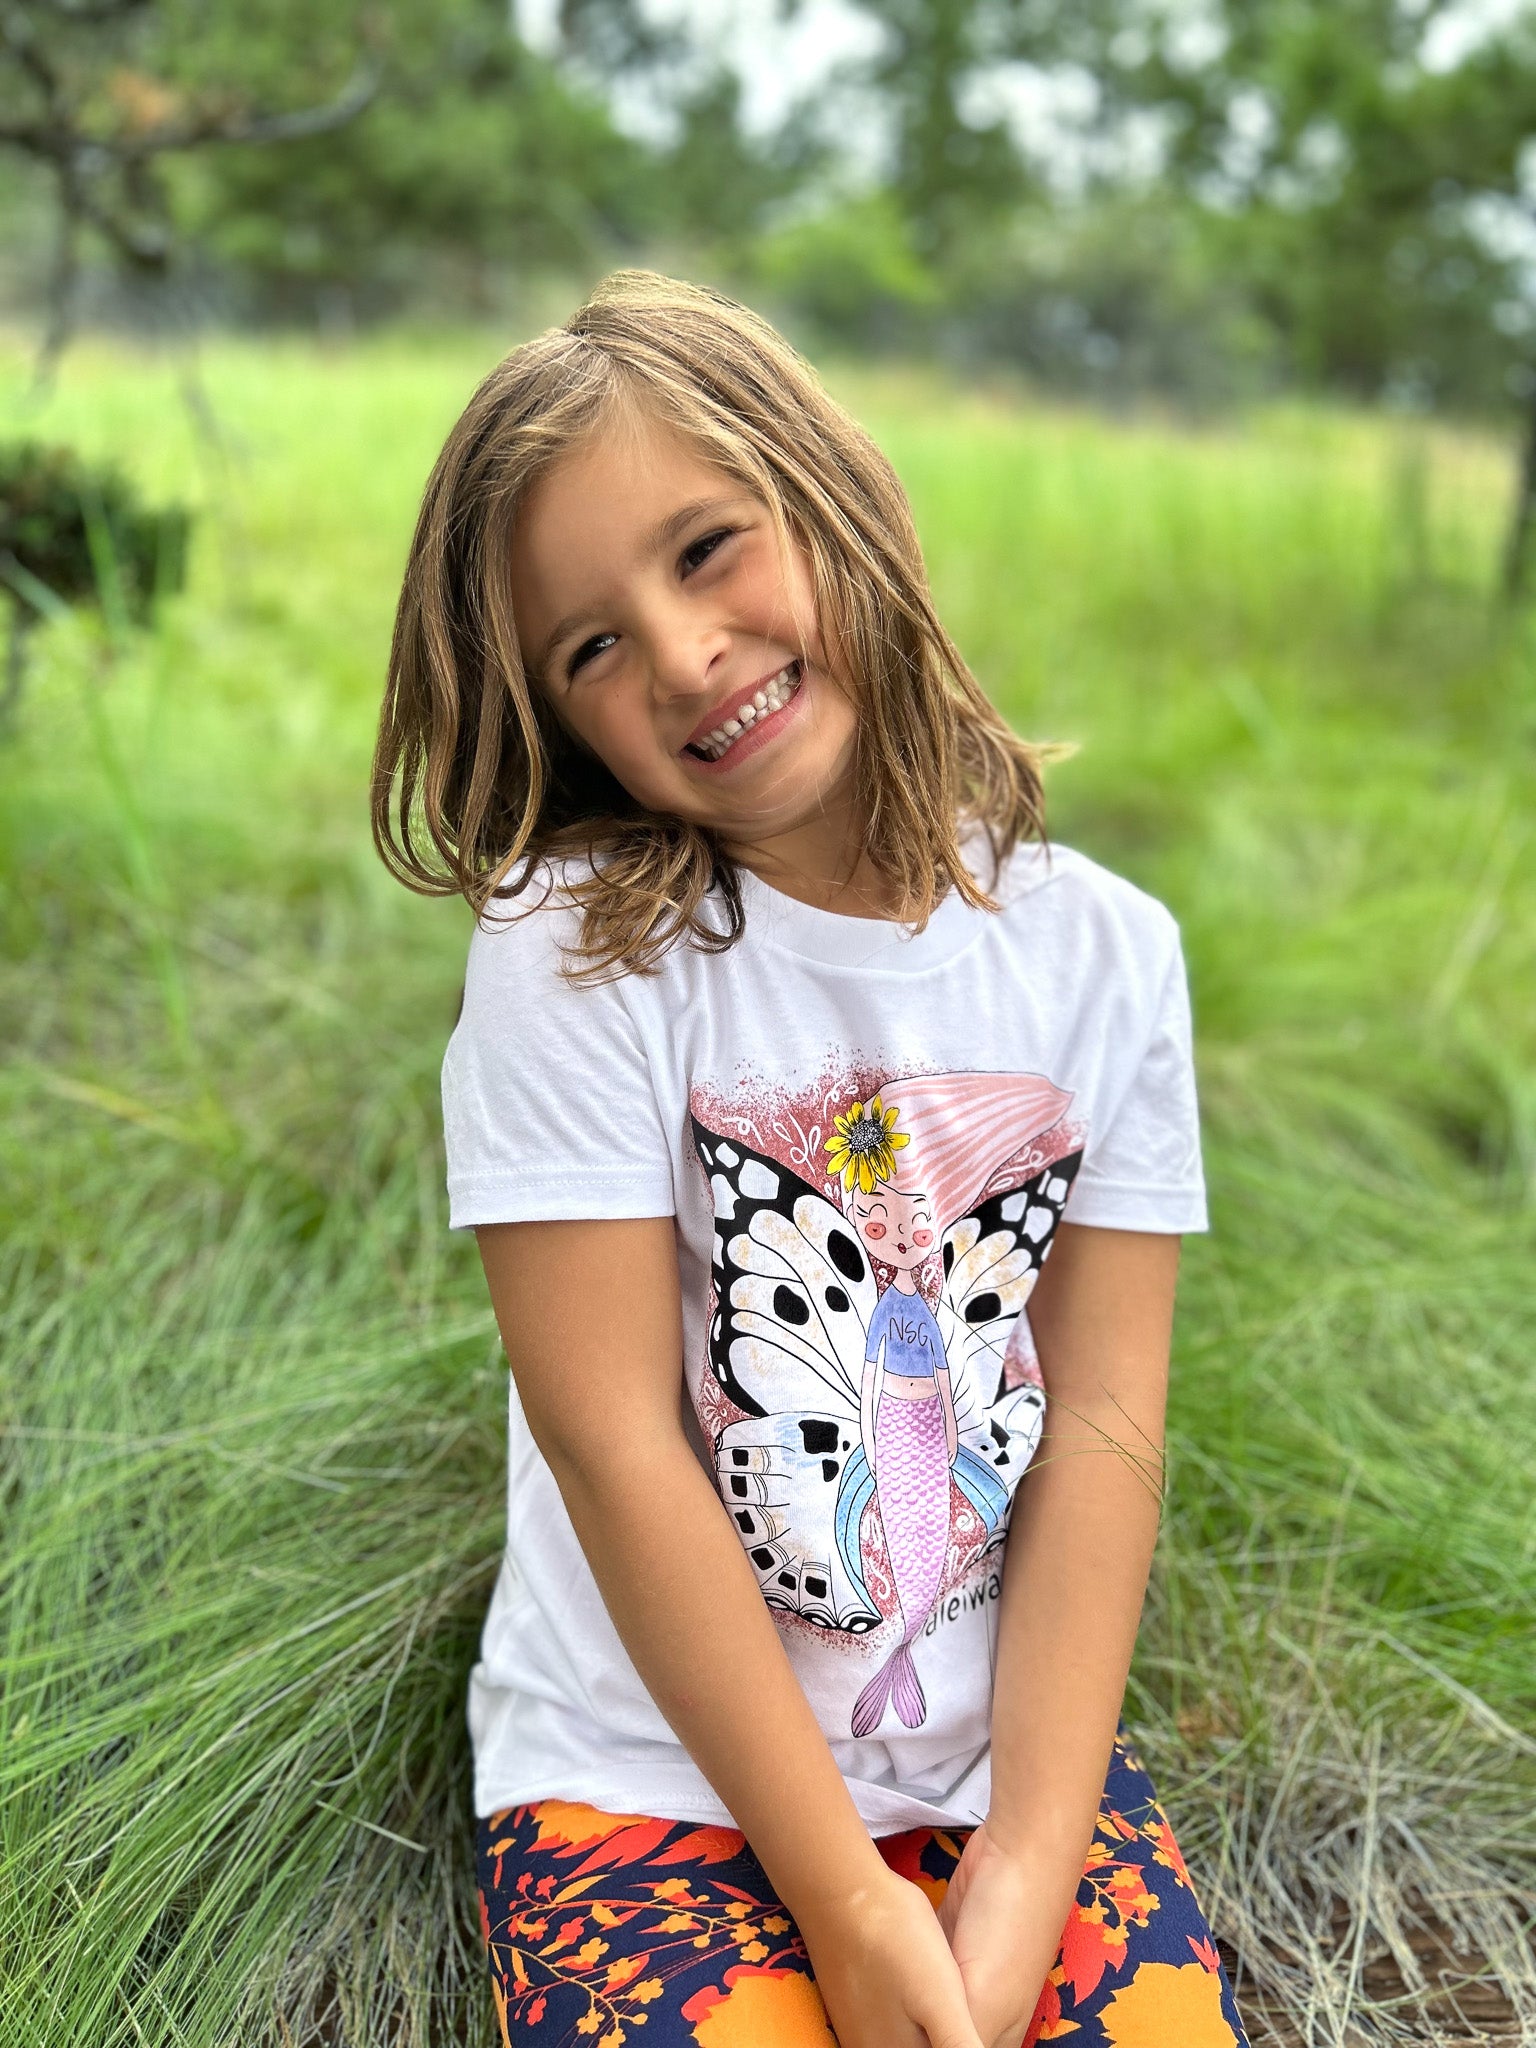 Haleiwa Girl Mermaid Butterfly graphic tee for girls, kids. Designed by female artist Nadia Watts in Southern California. A perfect gift for the mermaid lover in your life.